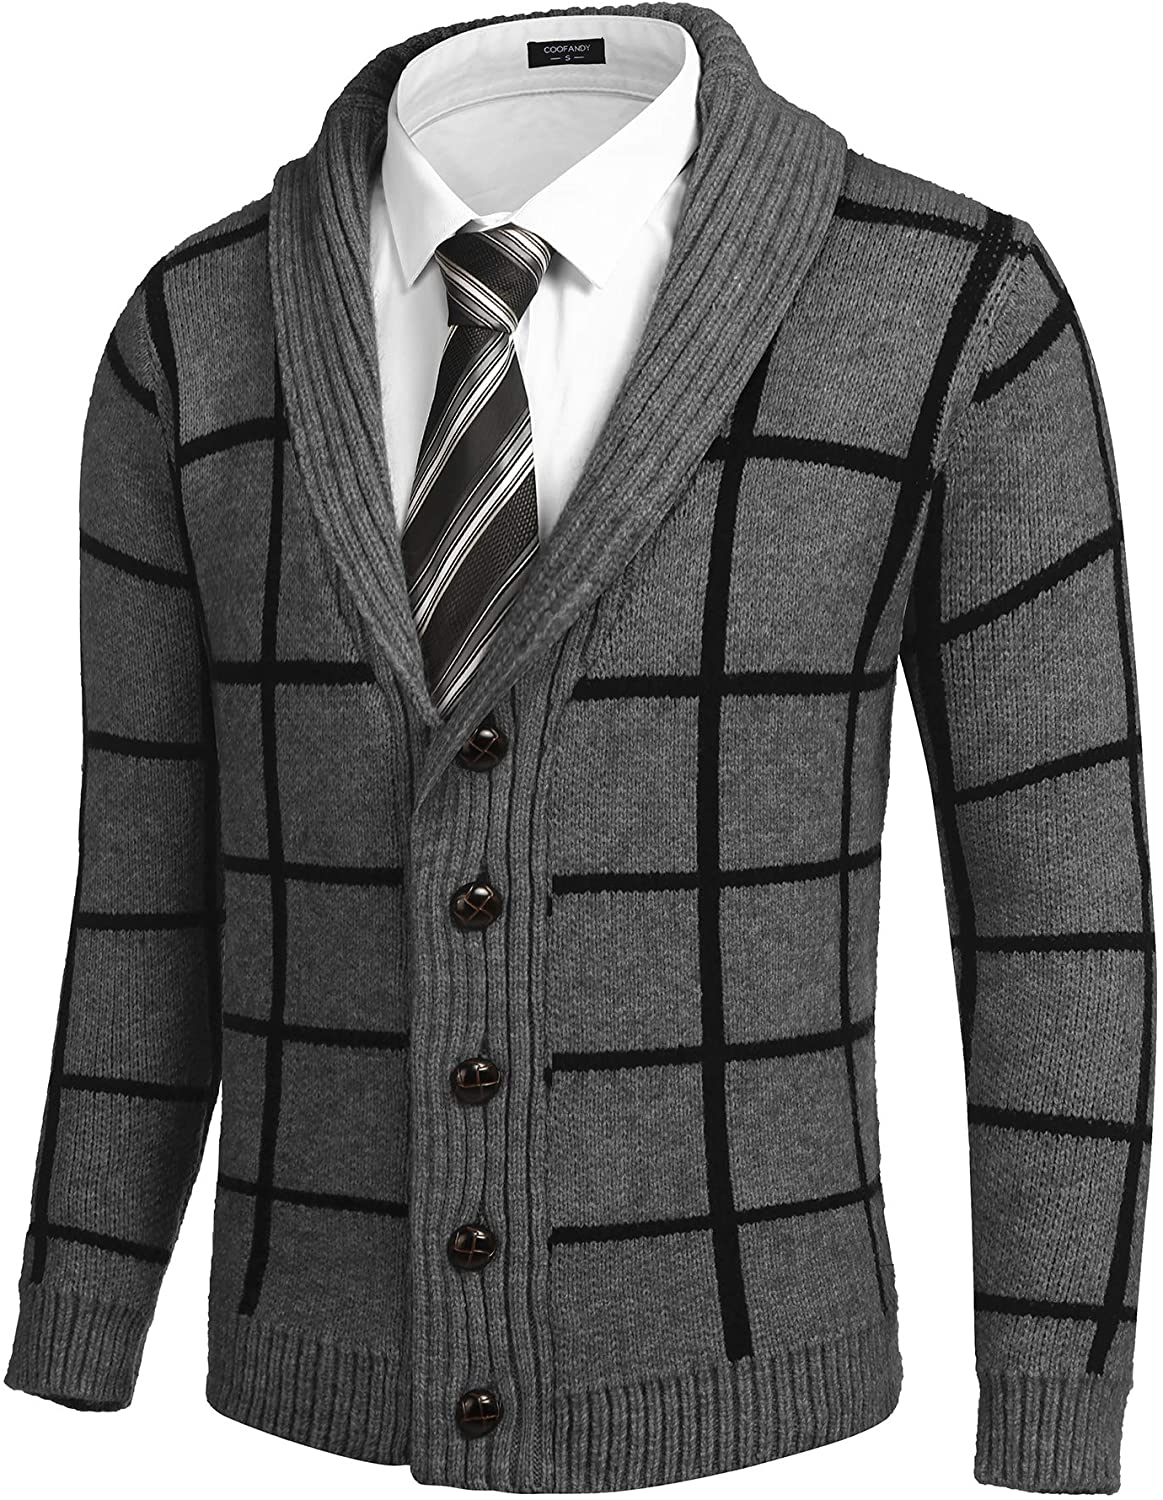 COOFANDY Men's Shawl Collar Cardigan Sweater Button Front Plaid Knitted ...